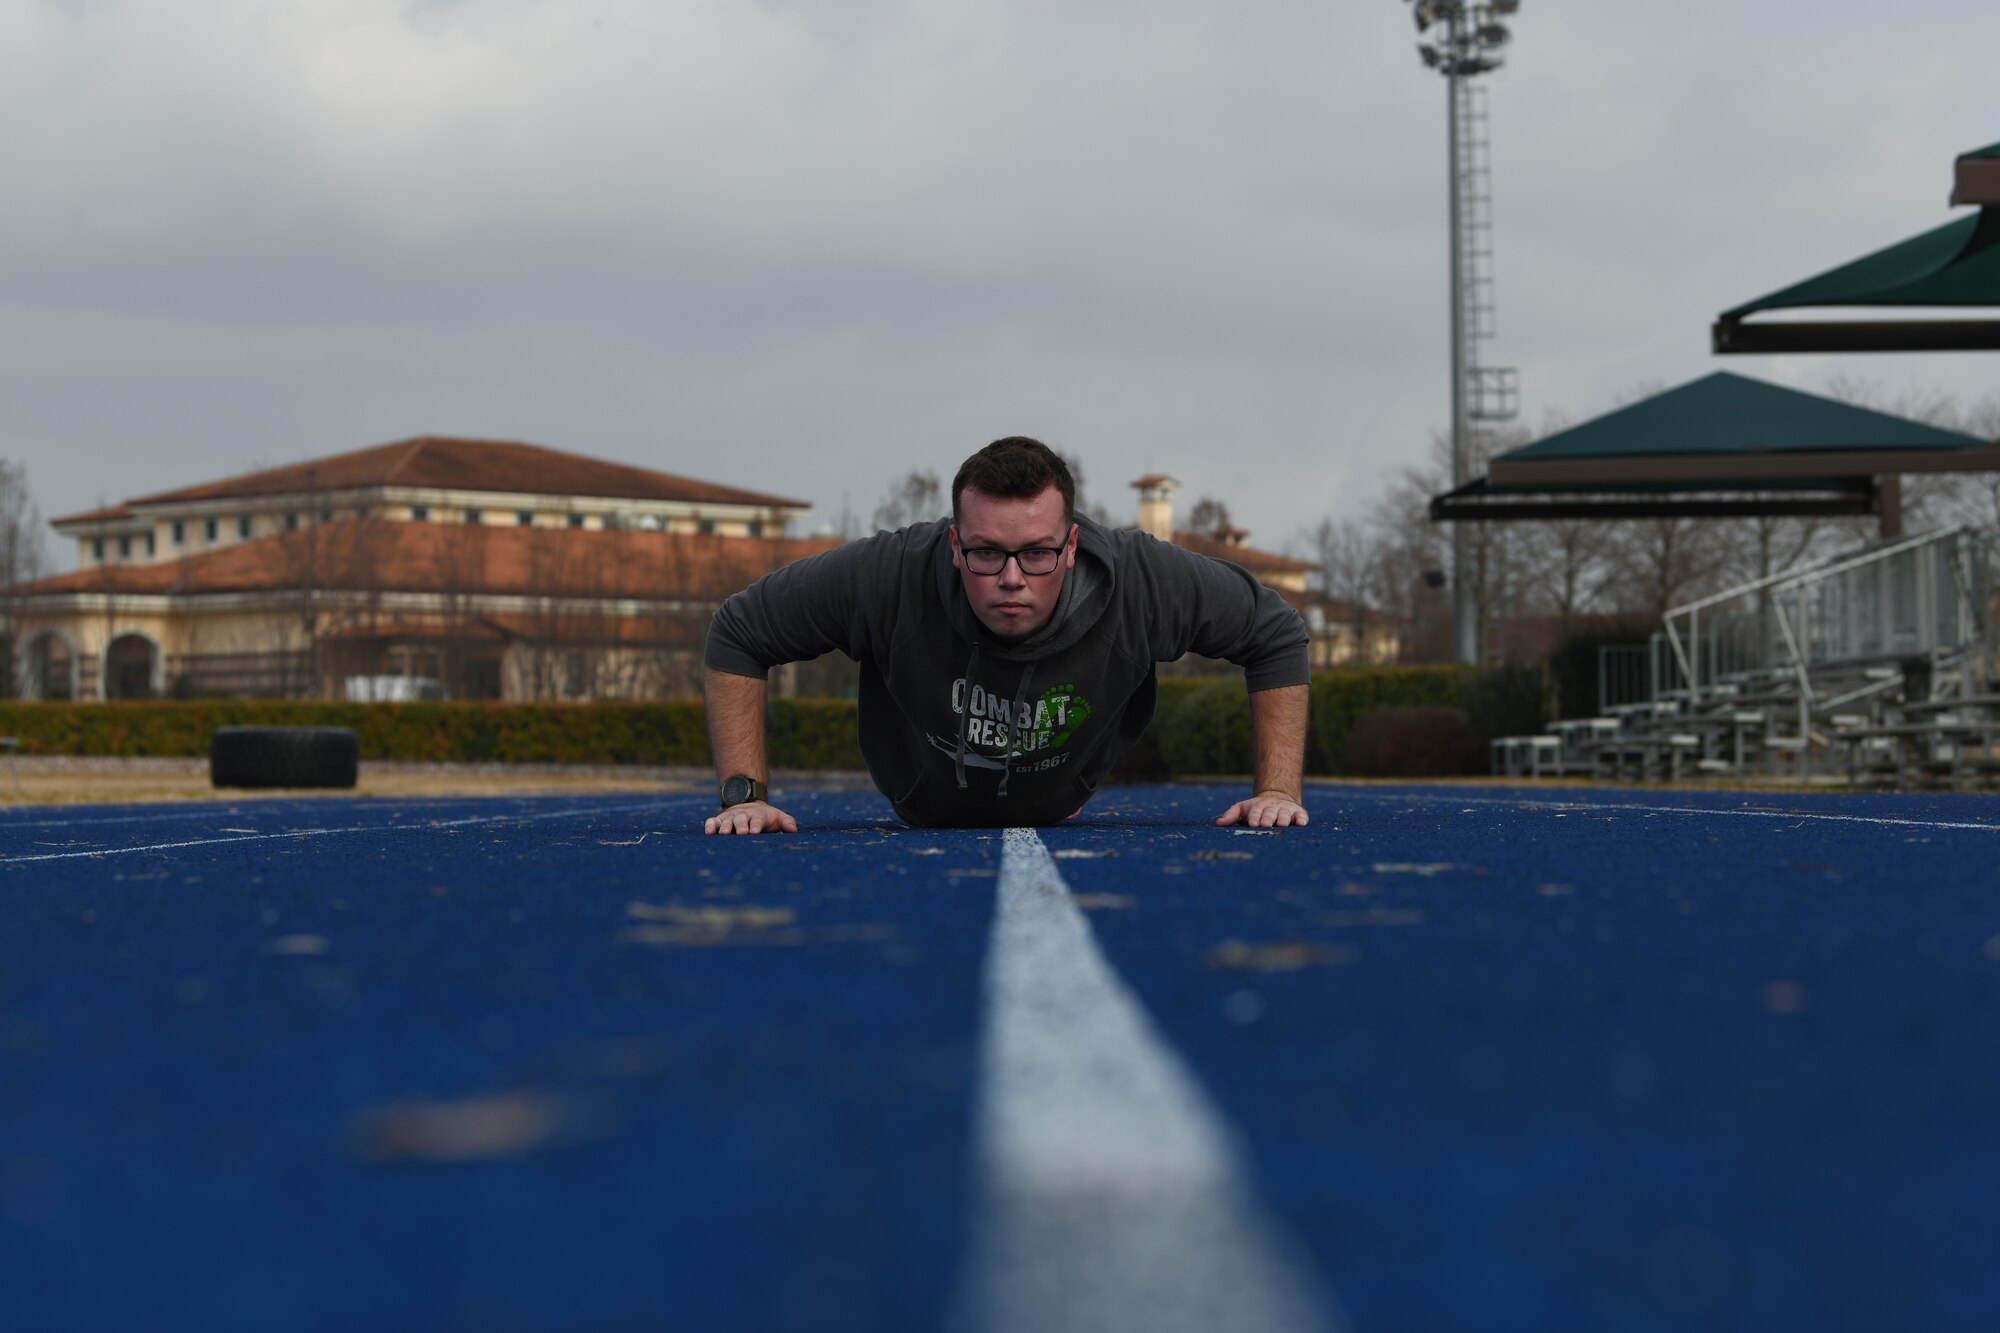 U.S. Air Force Airman 1st Class Dale Riehl, 31st Aircraft Maintenance Squadron, 56th Helicopter Maintenance Unit, helicopter tilt rotor maintainer, performs as many pushups as he can in one minute at Aviano Air Base, Italy, Jan. 27, 2019. Being physically fit allows Airmen to properly support the Air Force mission. (U.S. Air Force photo by Airman 1st Class Ericka A. Woolever)